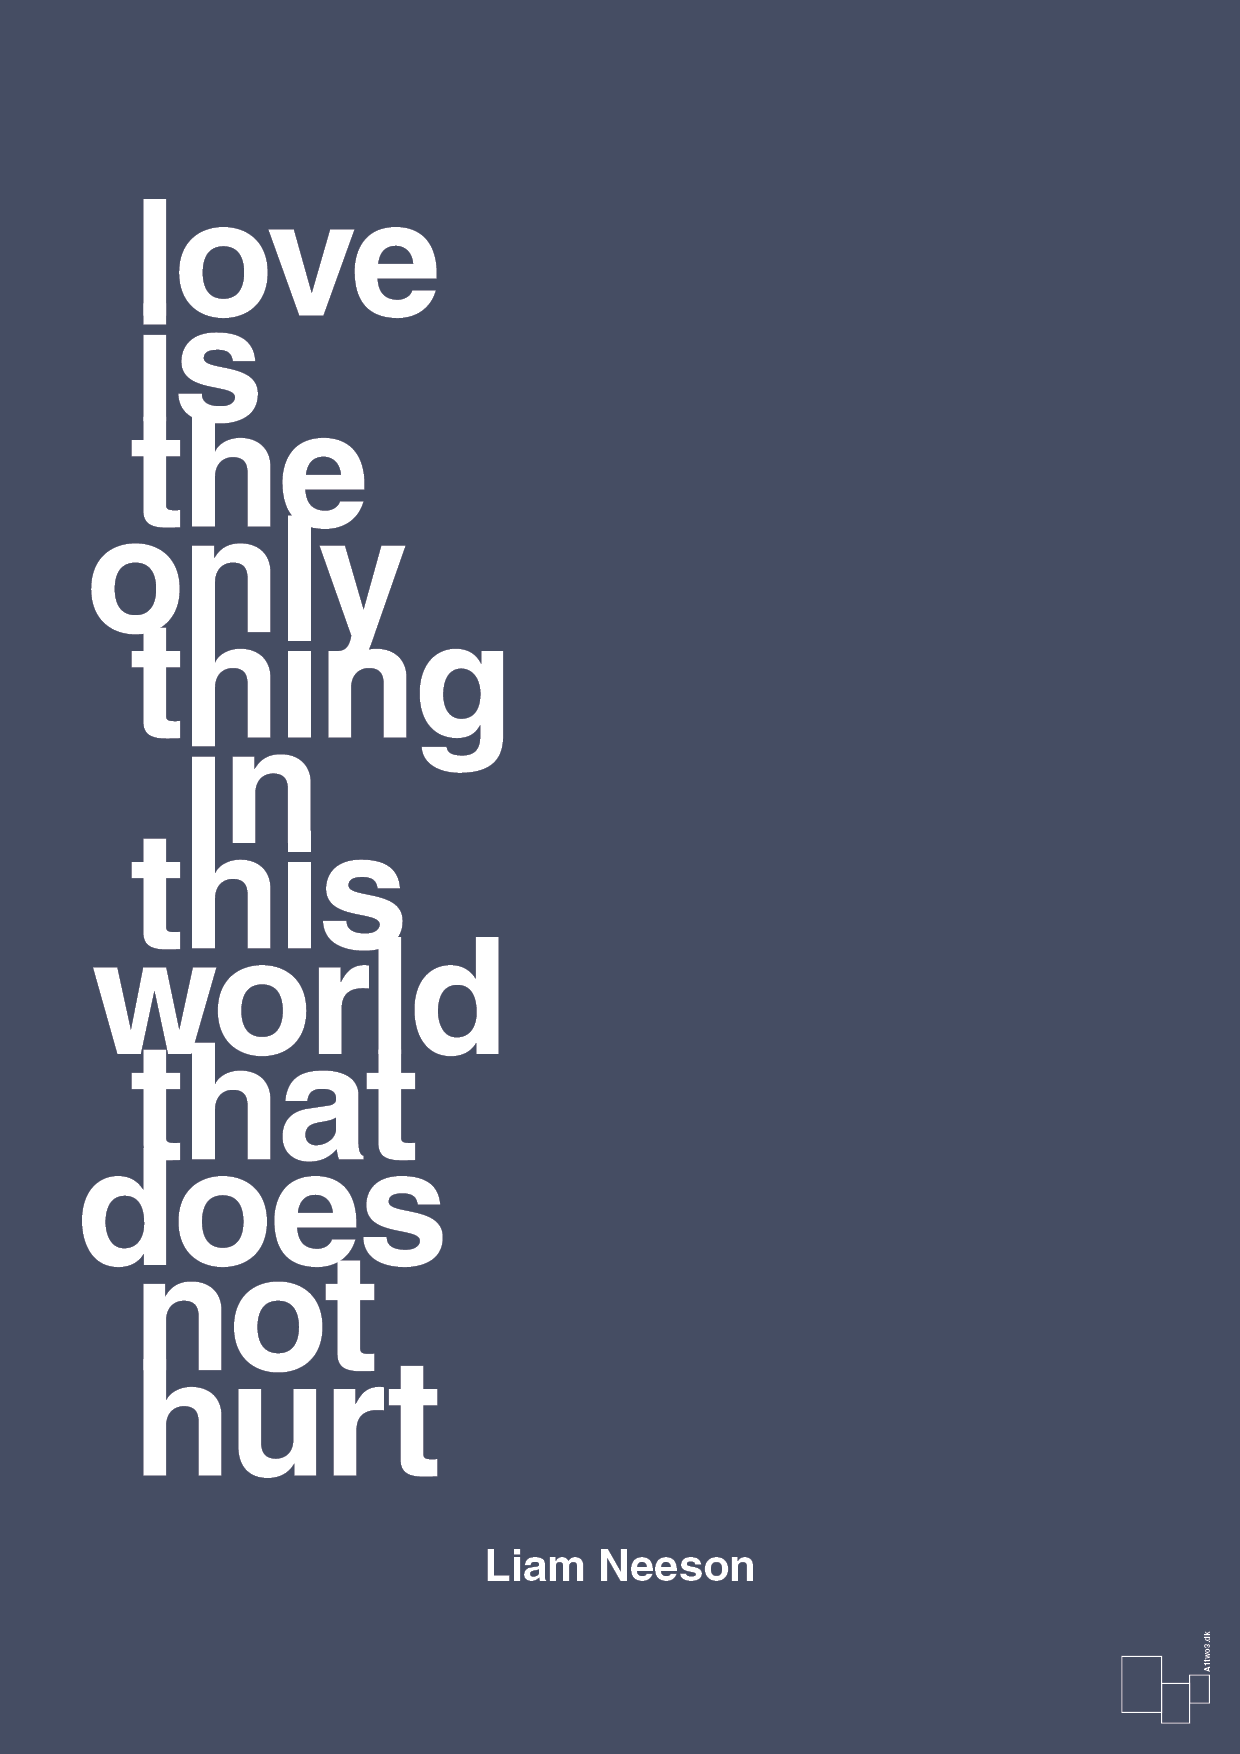 love is the only thing in this world that does not hurt - Plakat med Citater i Petrol